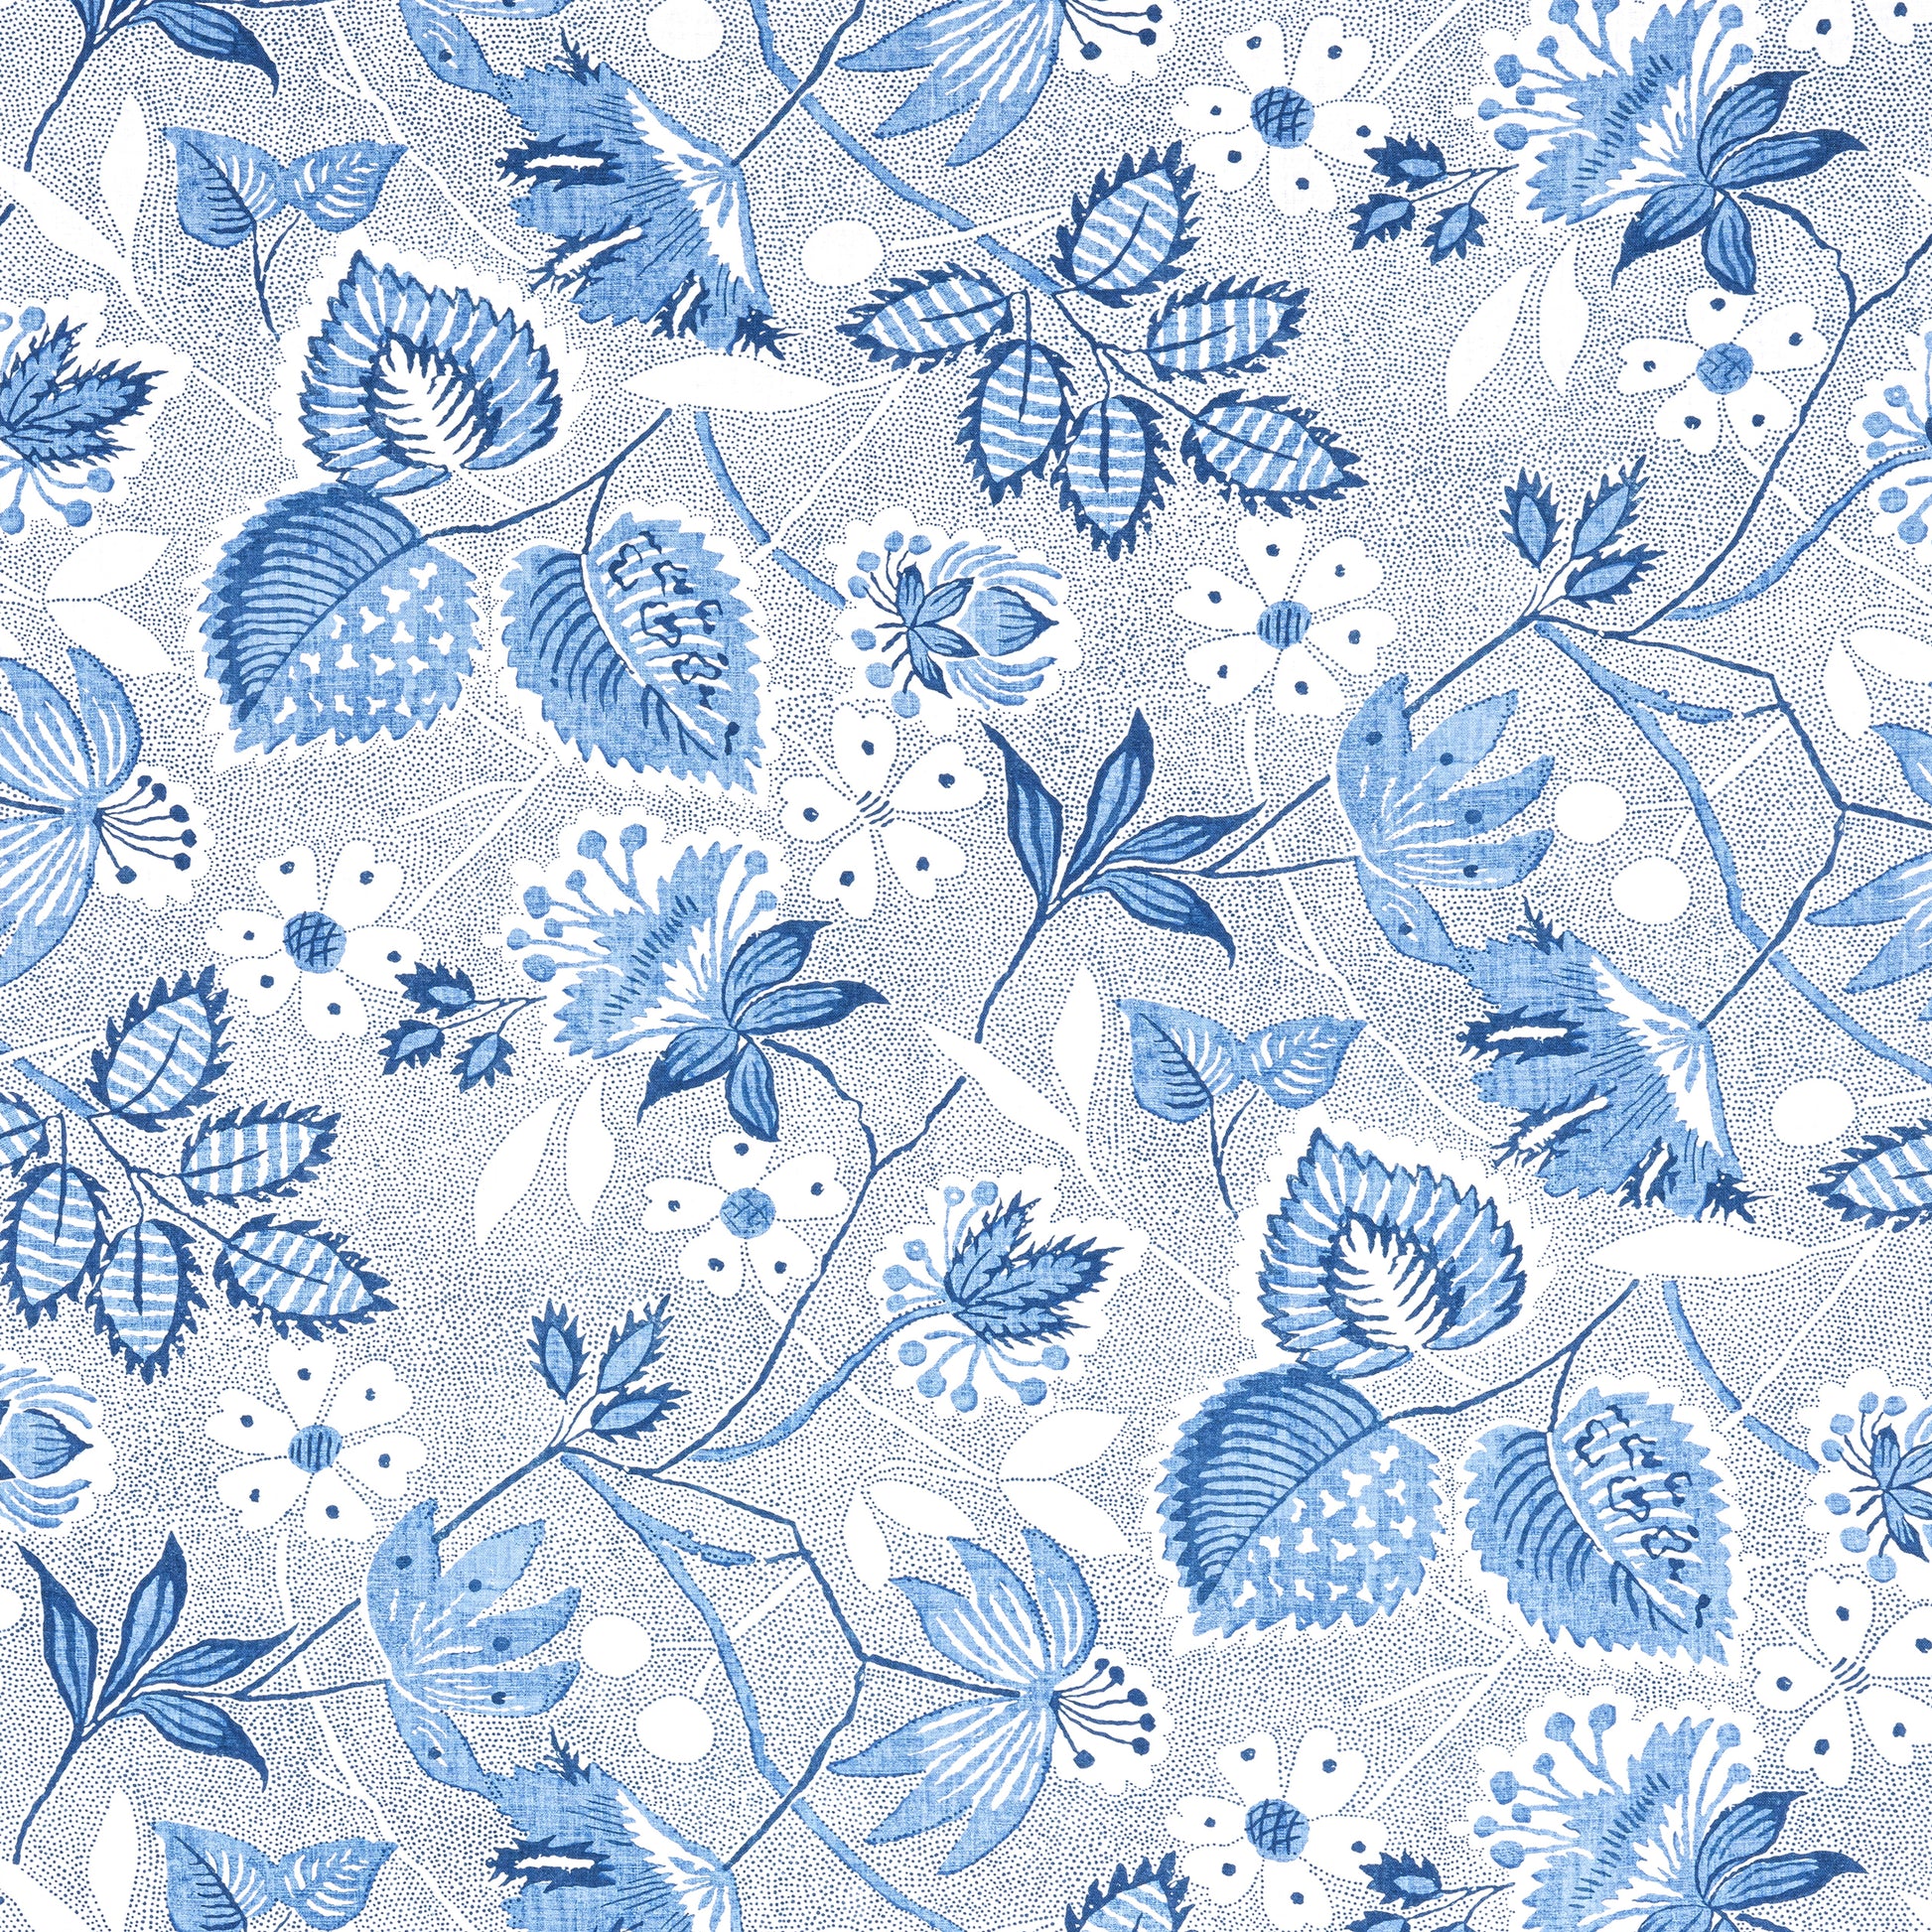 Purchase  Ann French Fabric Item# AF15116  pattern name  Indienne Hazel